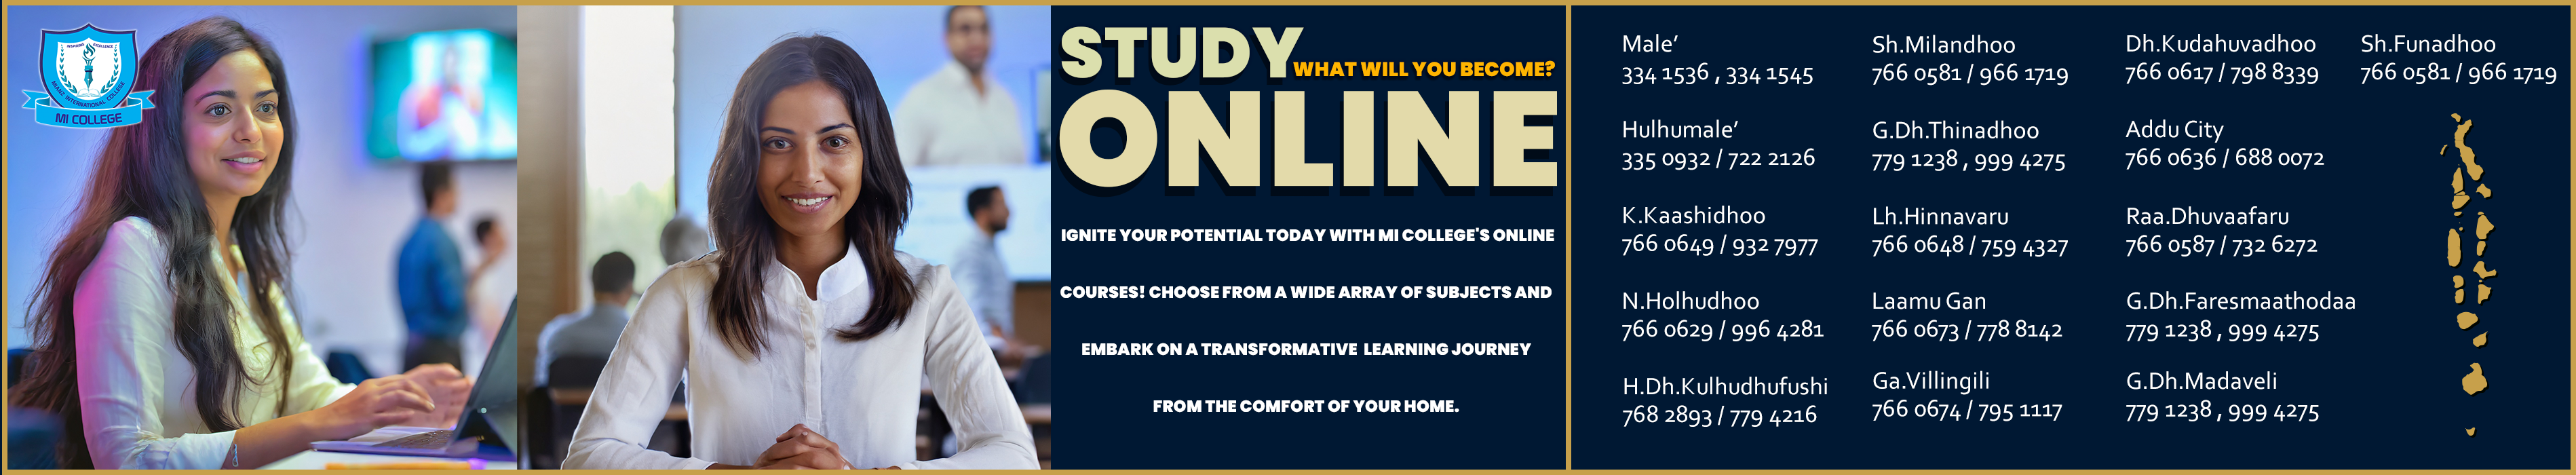 1703498781Study Online Banner.png